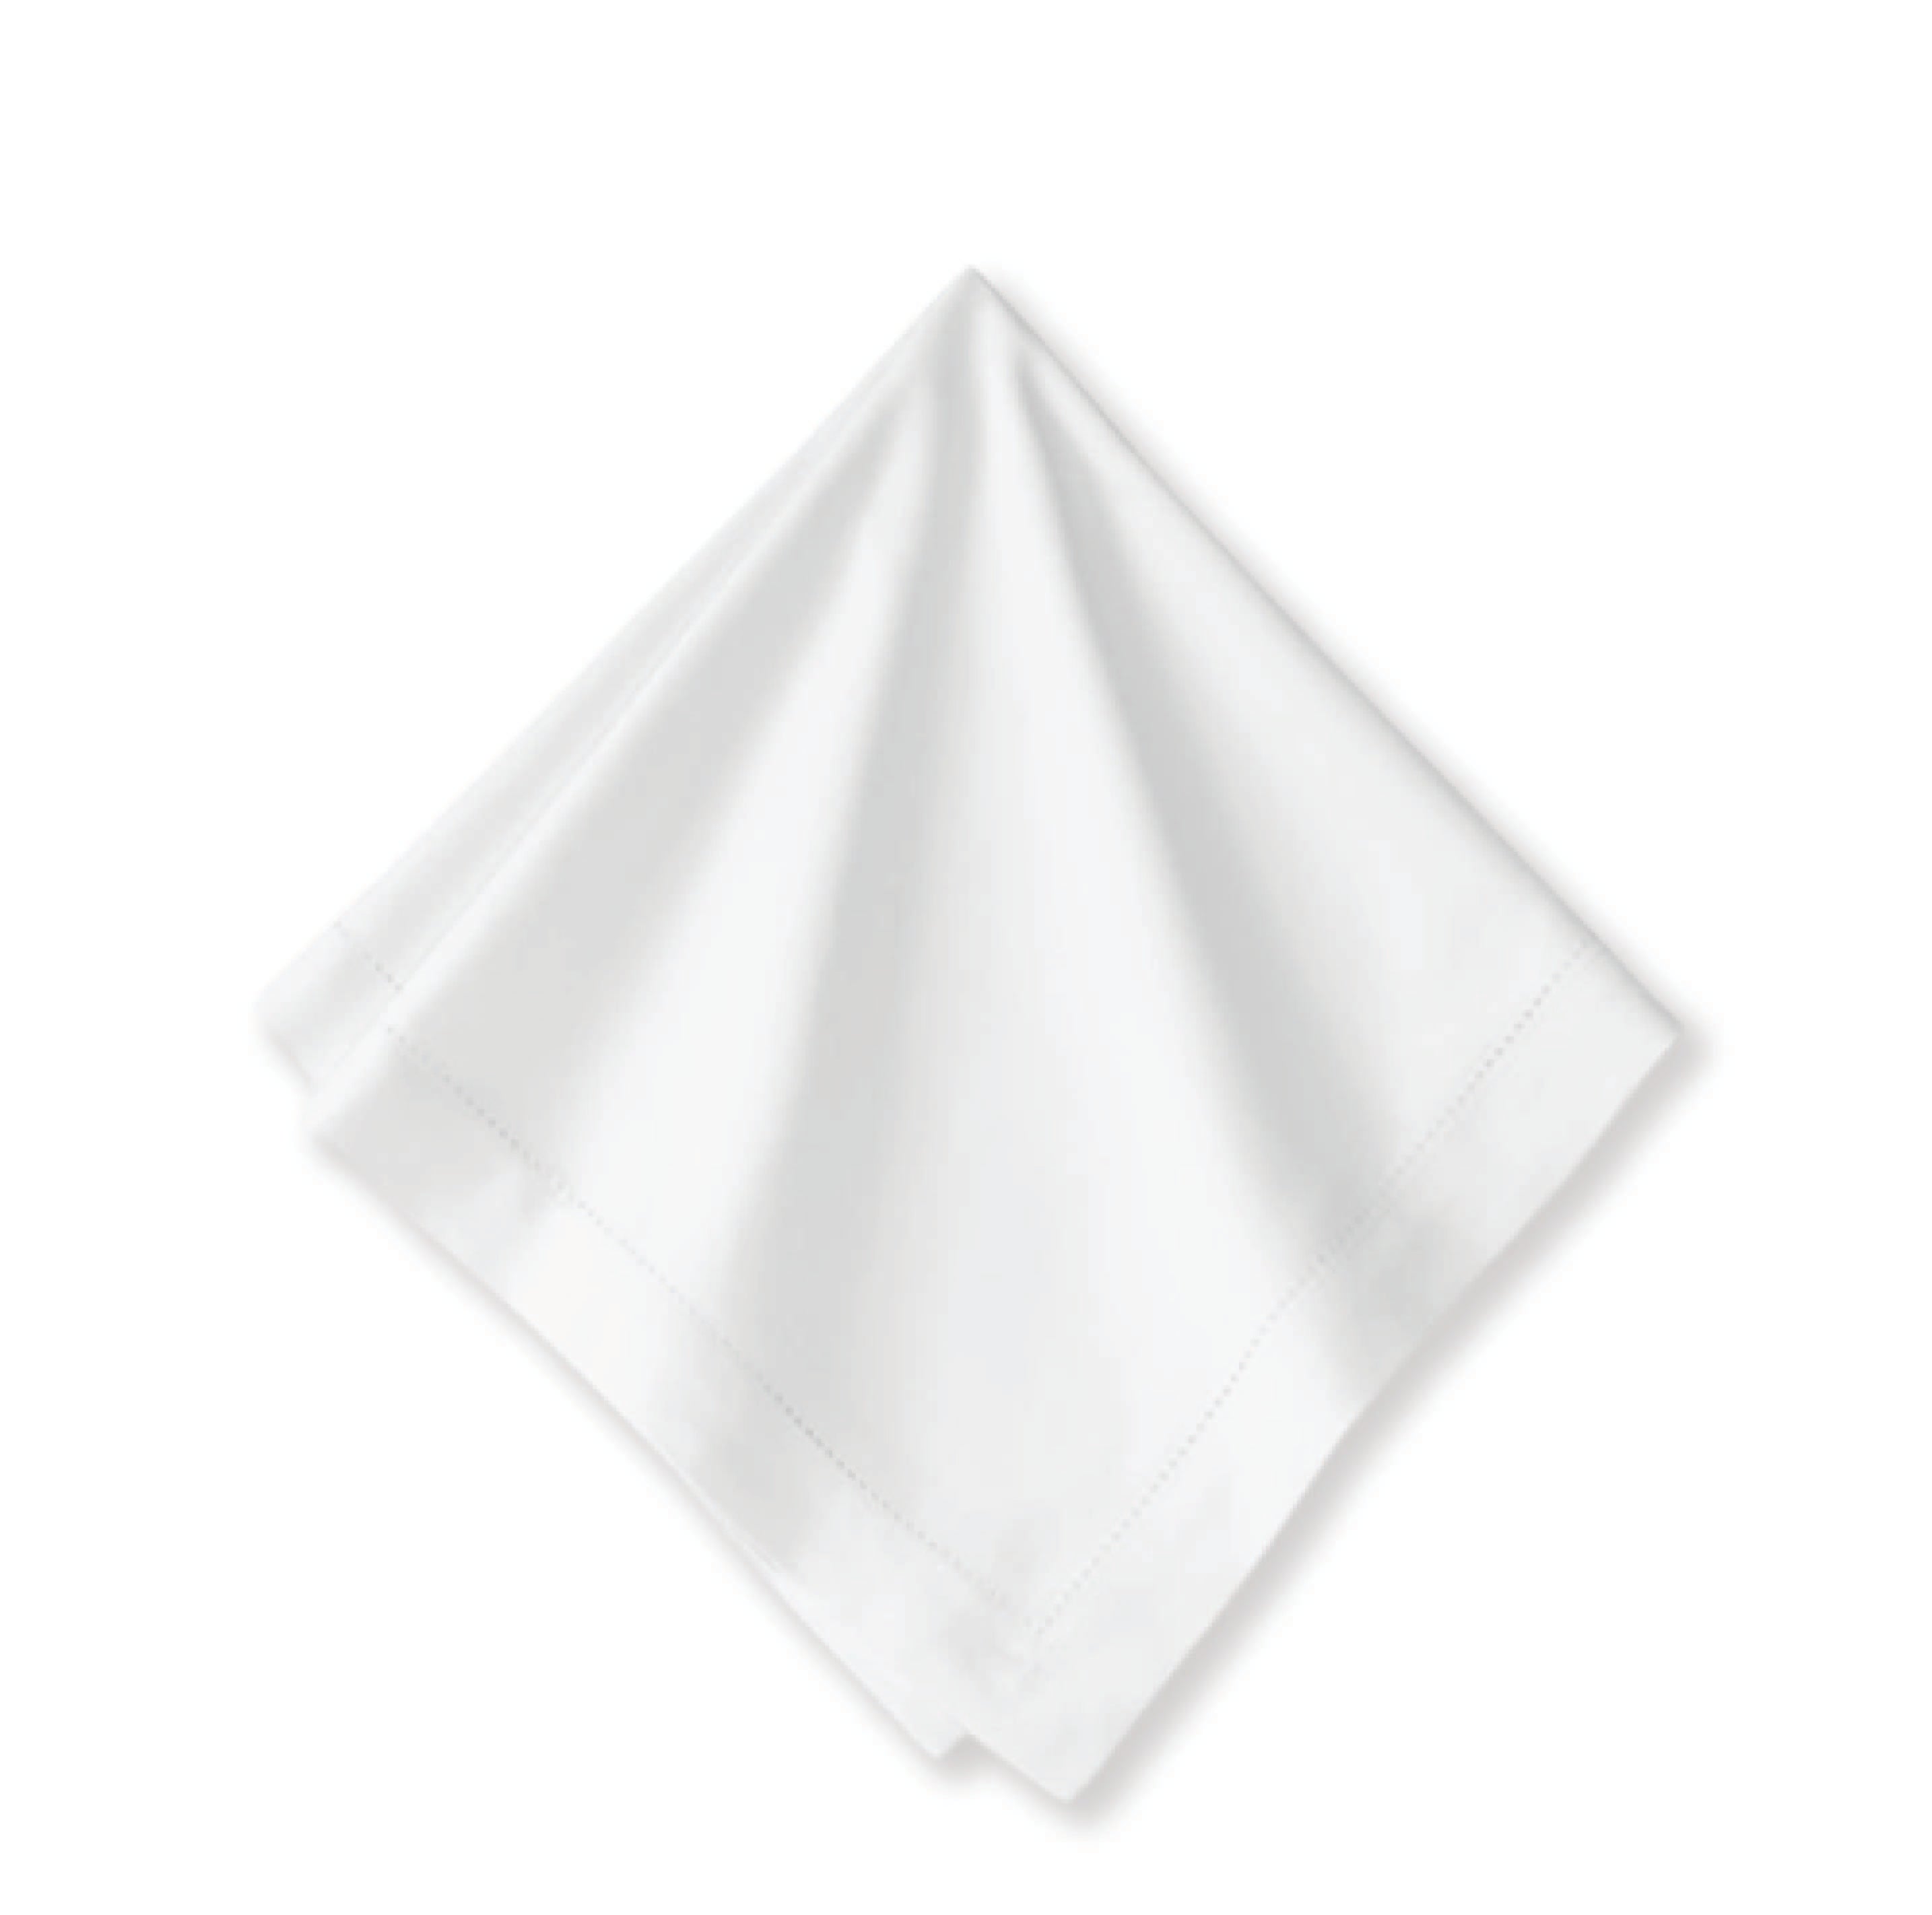 White Dinner Napkins with Classic Hemstitch, Various Sizes – Blanks for  Crafters